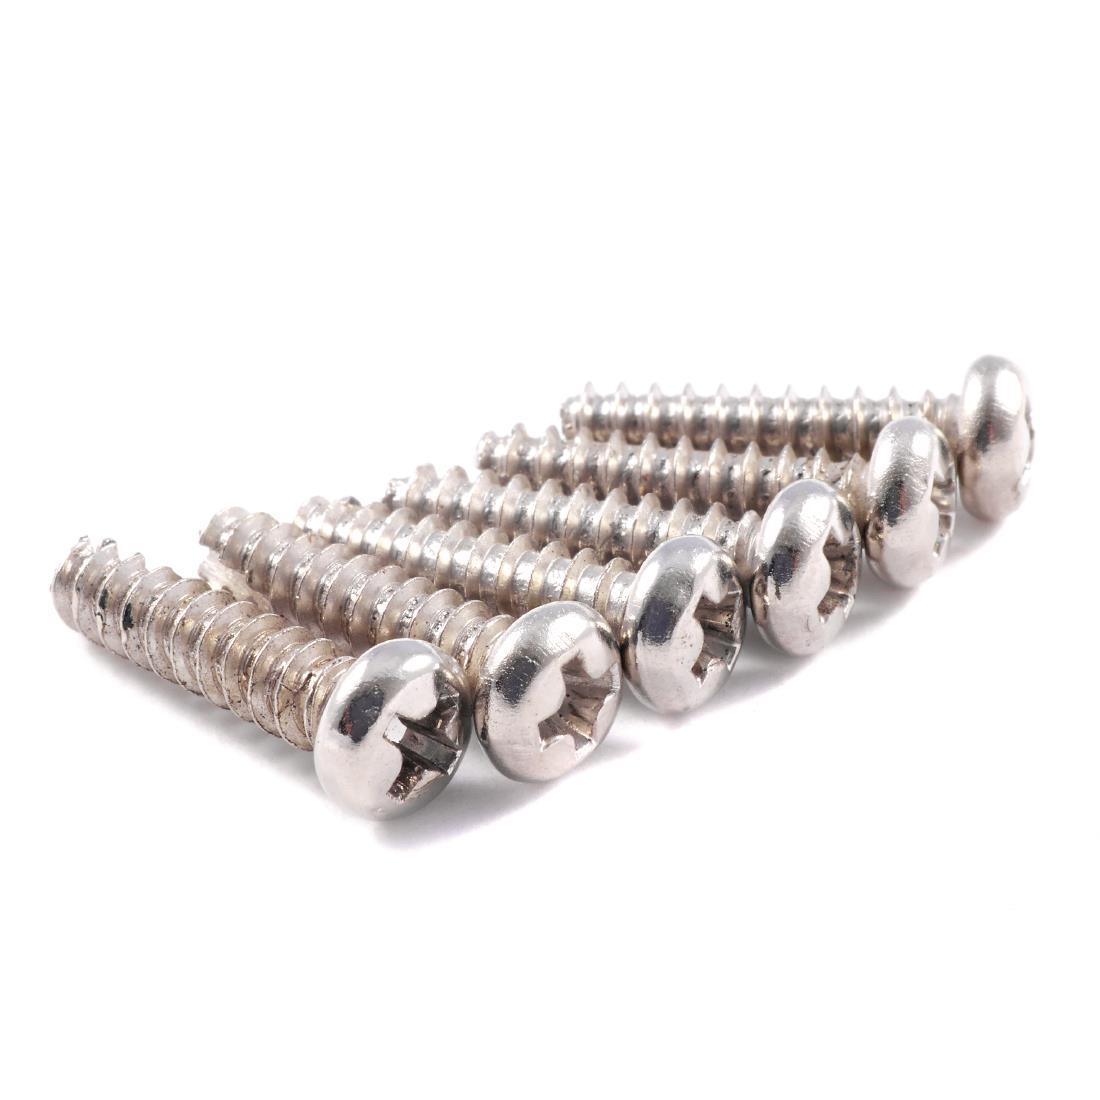 Screw for Waring Juice Extractor (Pack of 6)